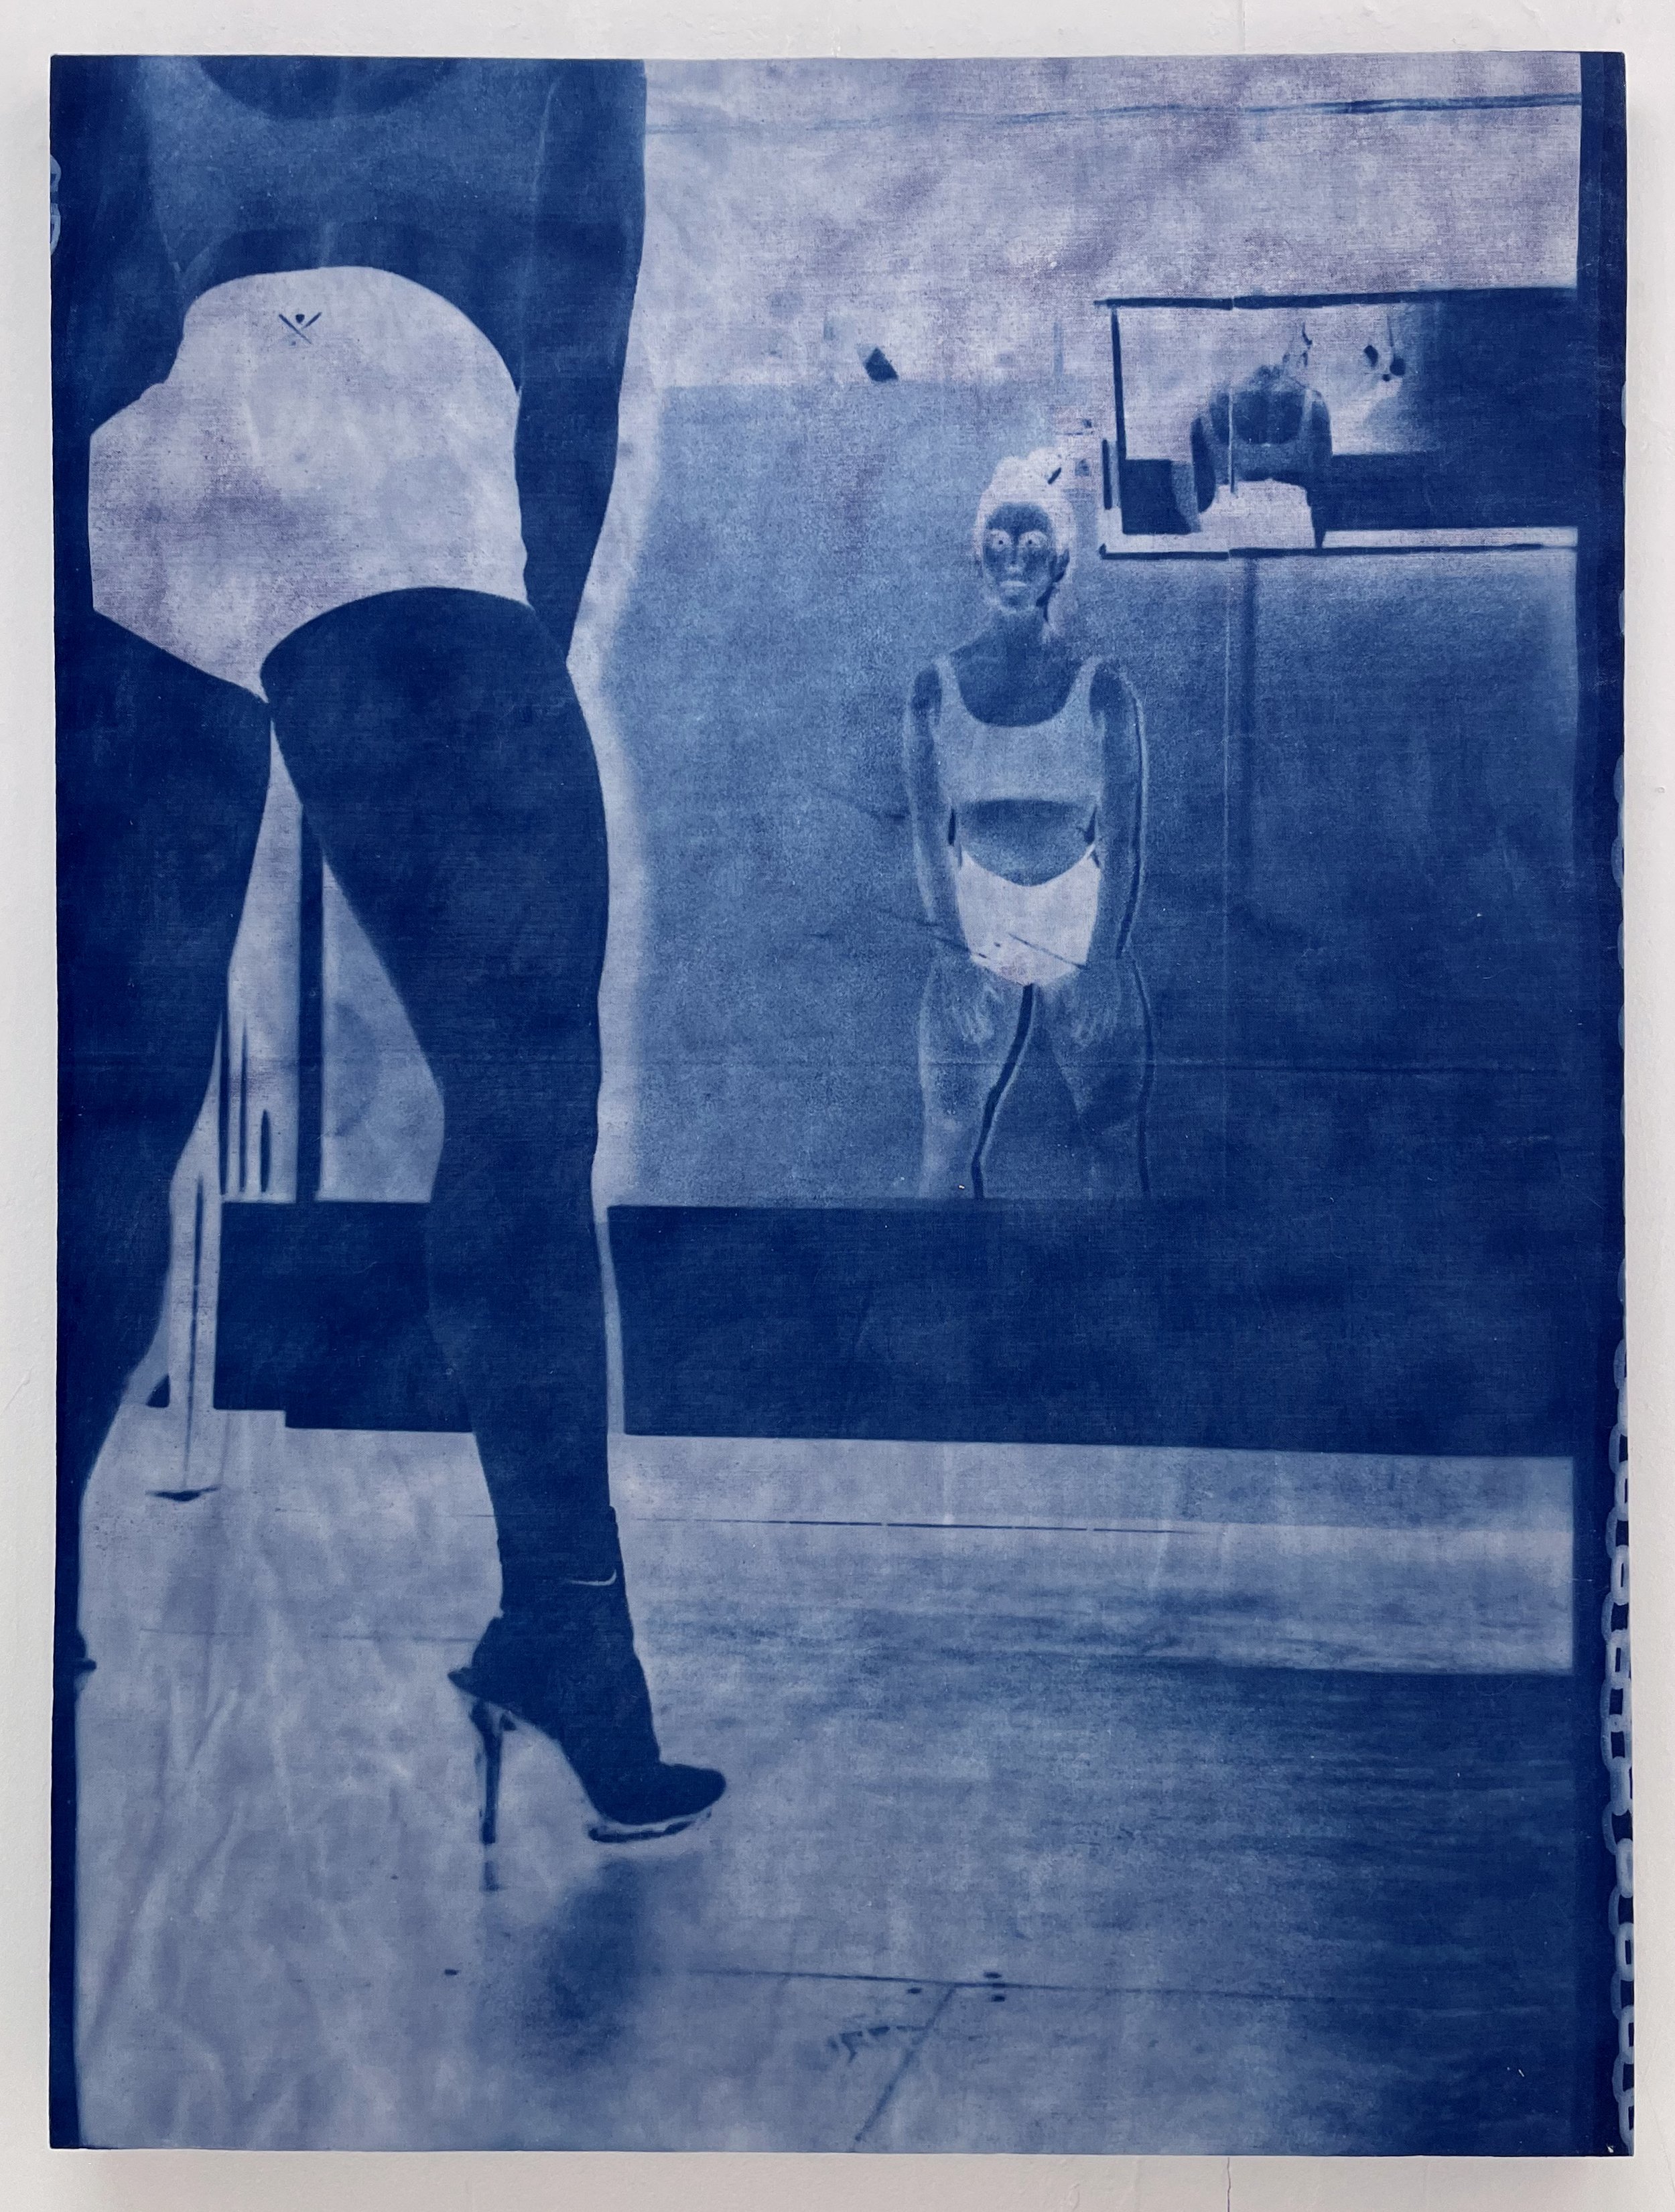  cyanotype on raw stretched canvas, 36” x 48”   